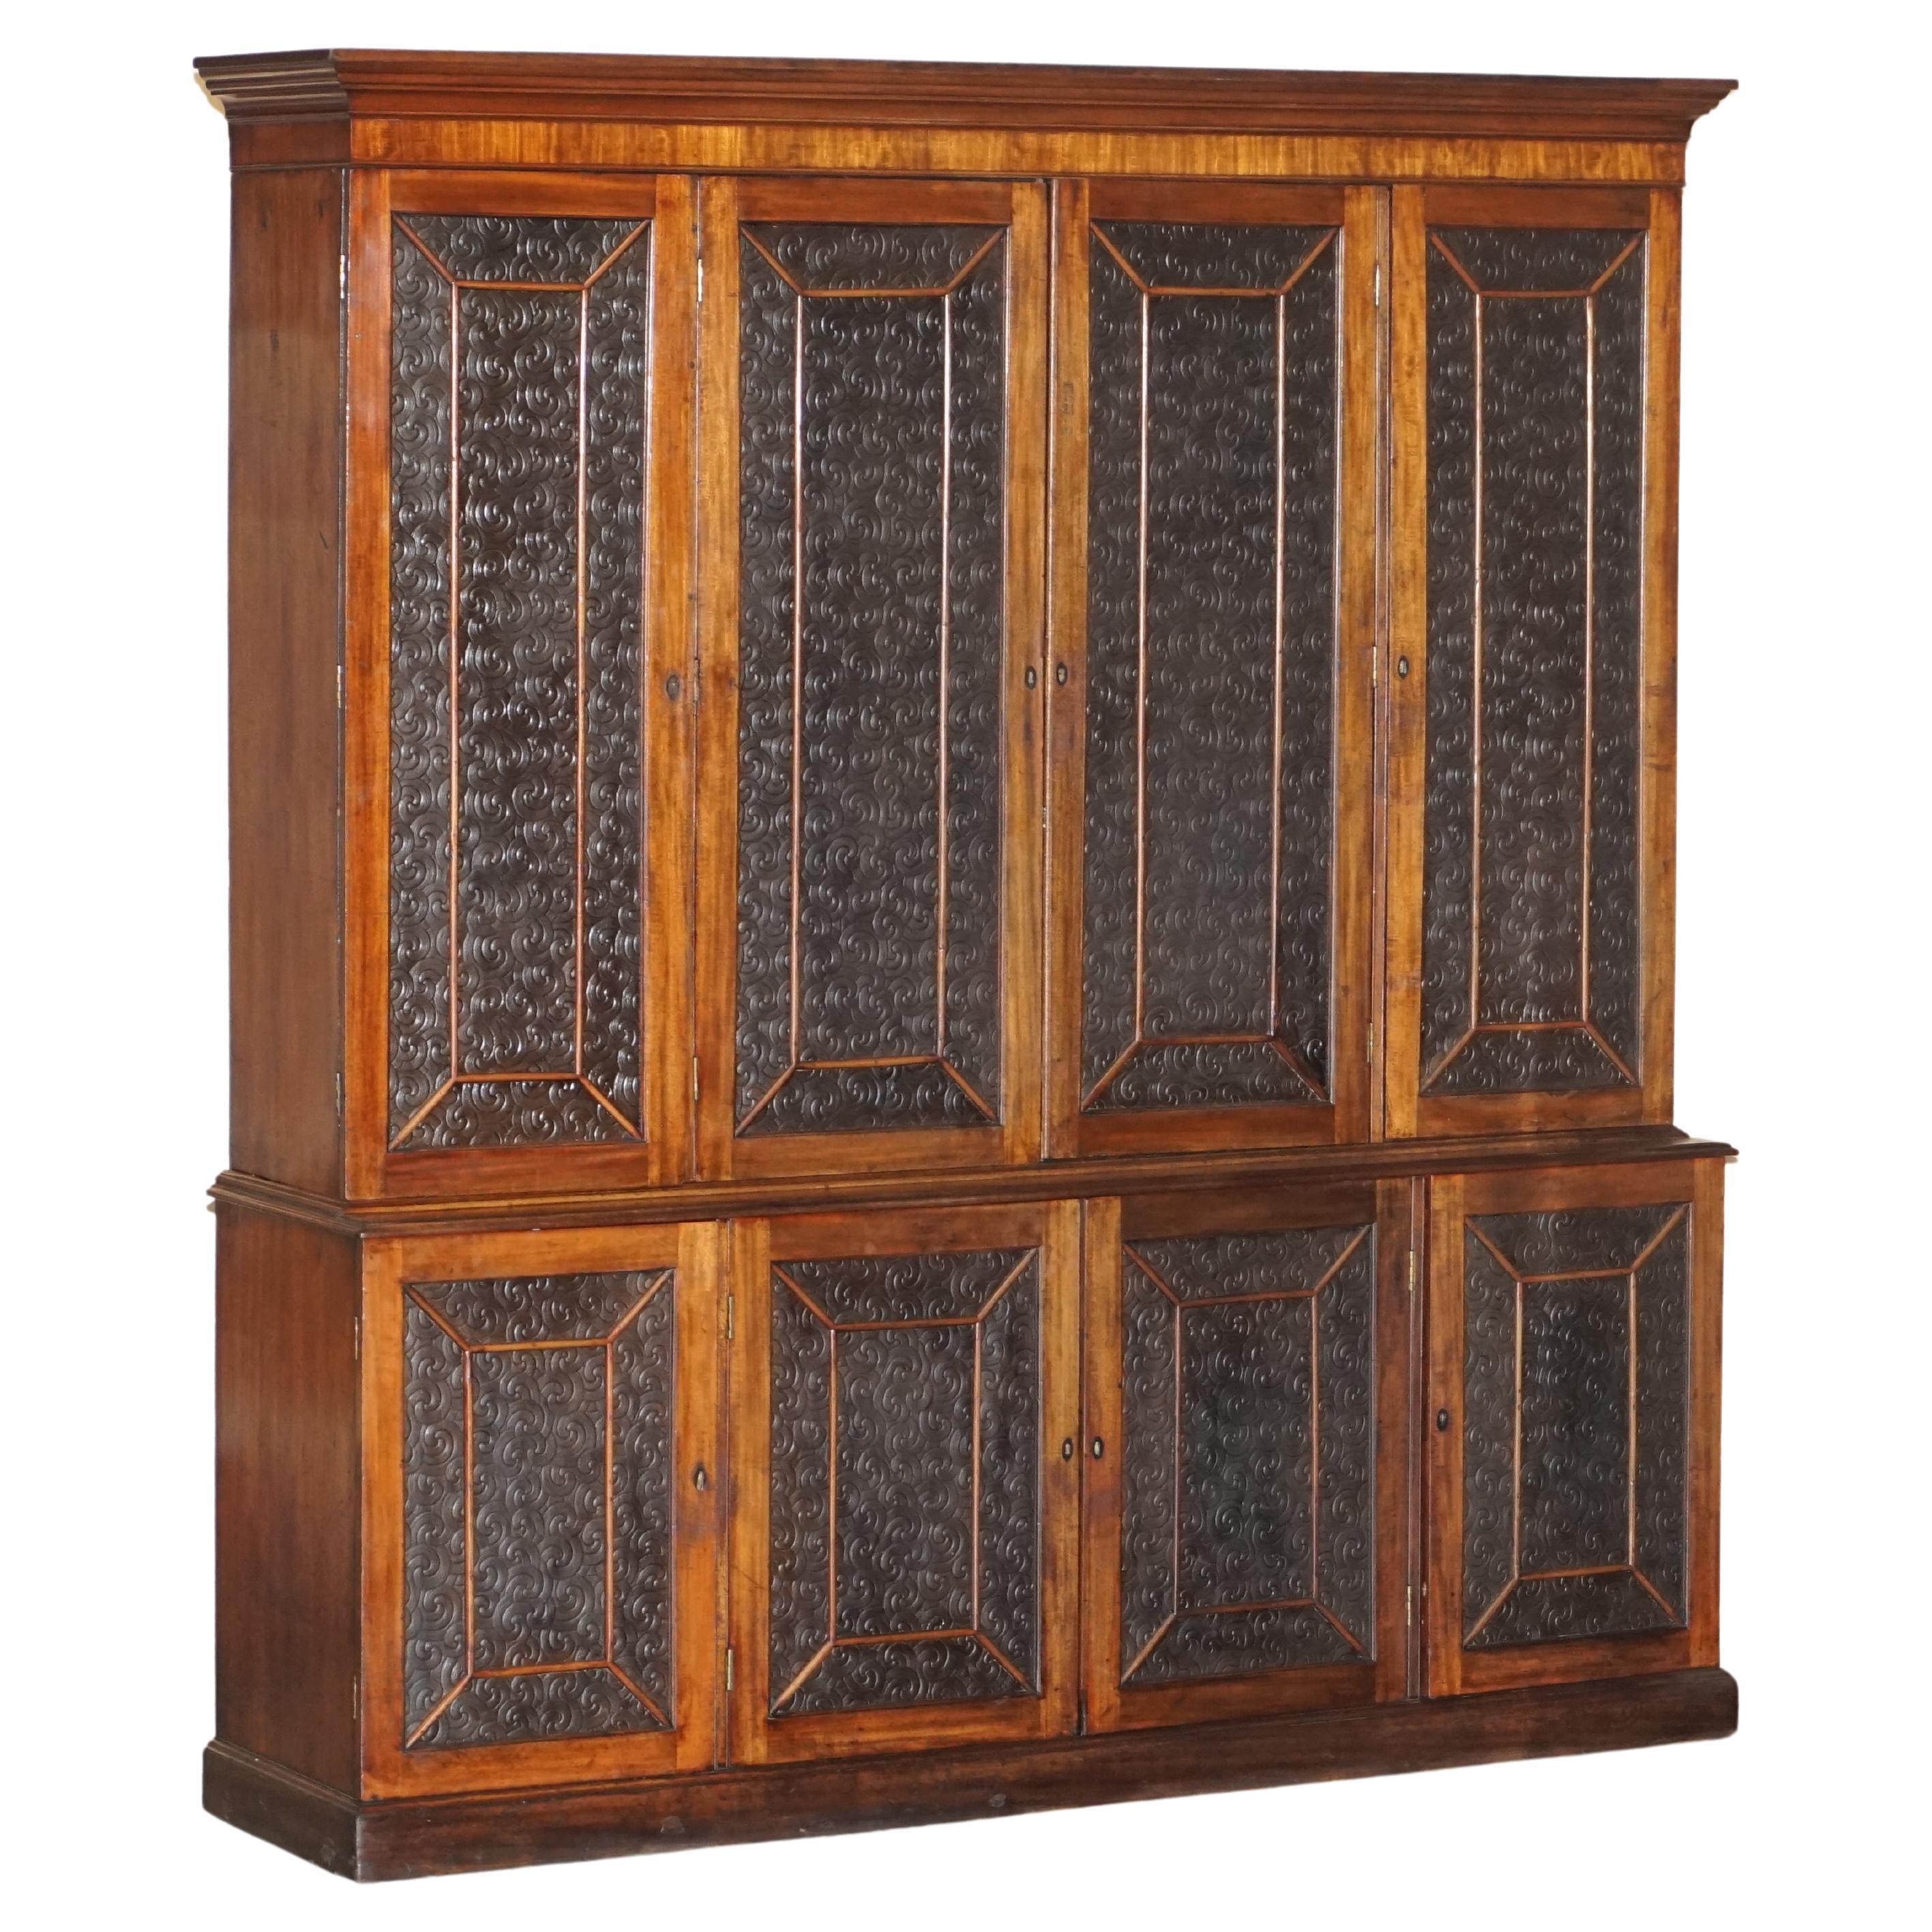 Stunning Antique Victorian Hardwood & Embossed Leather Library Bookcase Cupboard For Sale